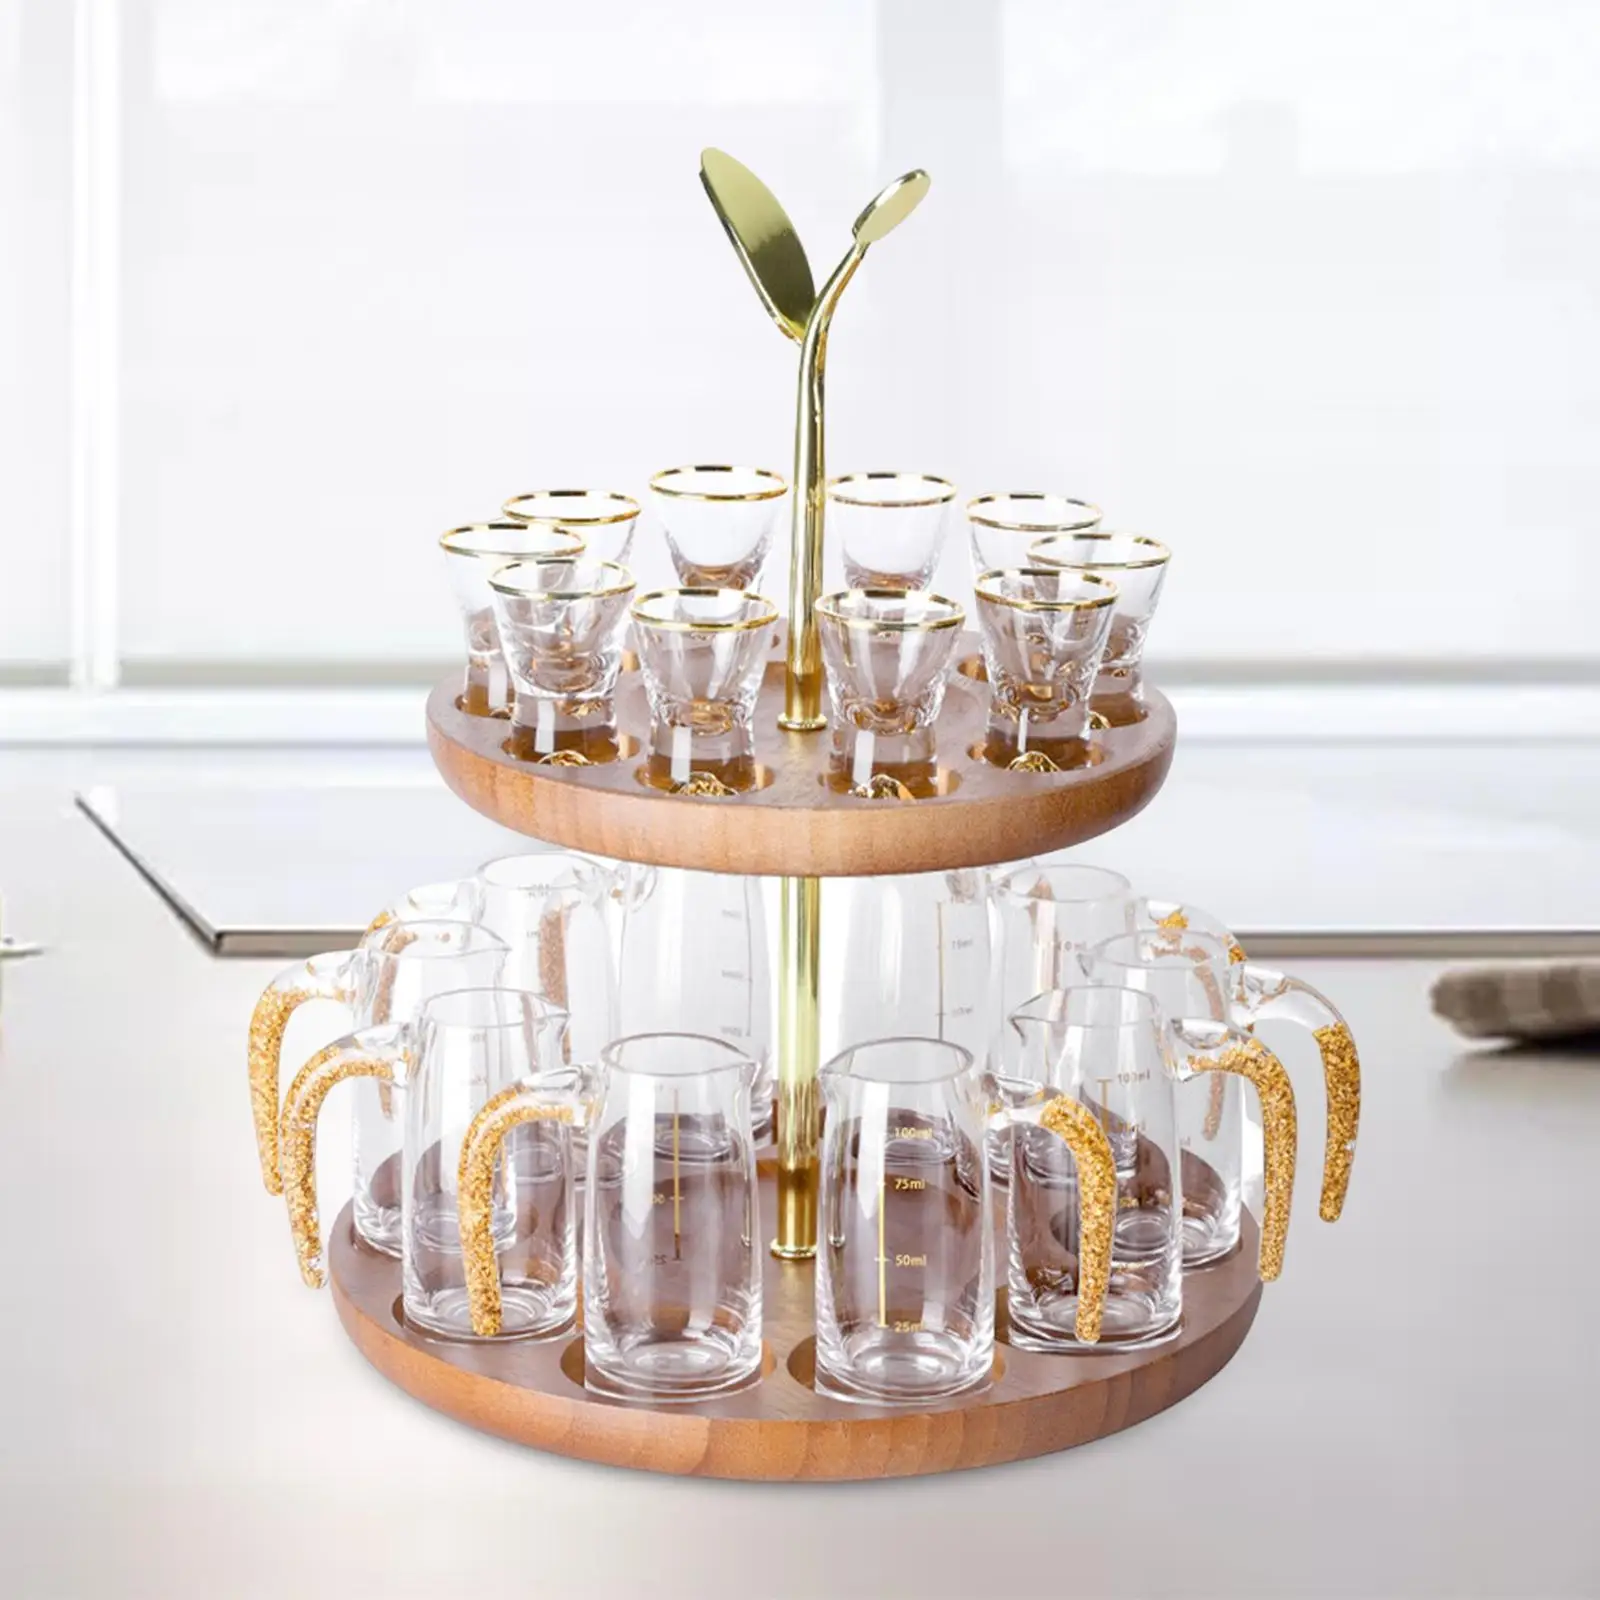 Drinking Cup Rack Water Cup Storage Holder for 20 Cups or Mugs Mug Holder Rack for Cabinet Tabletop Countertop Kitchen